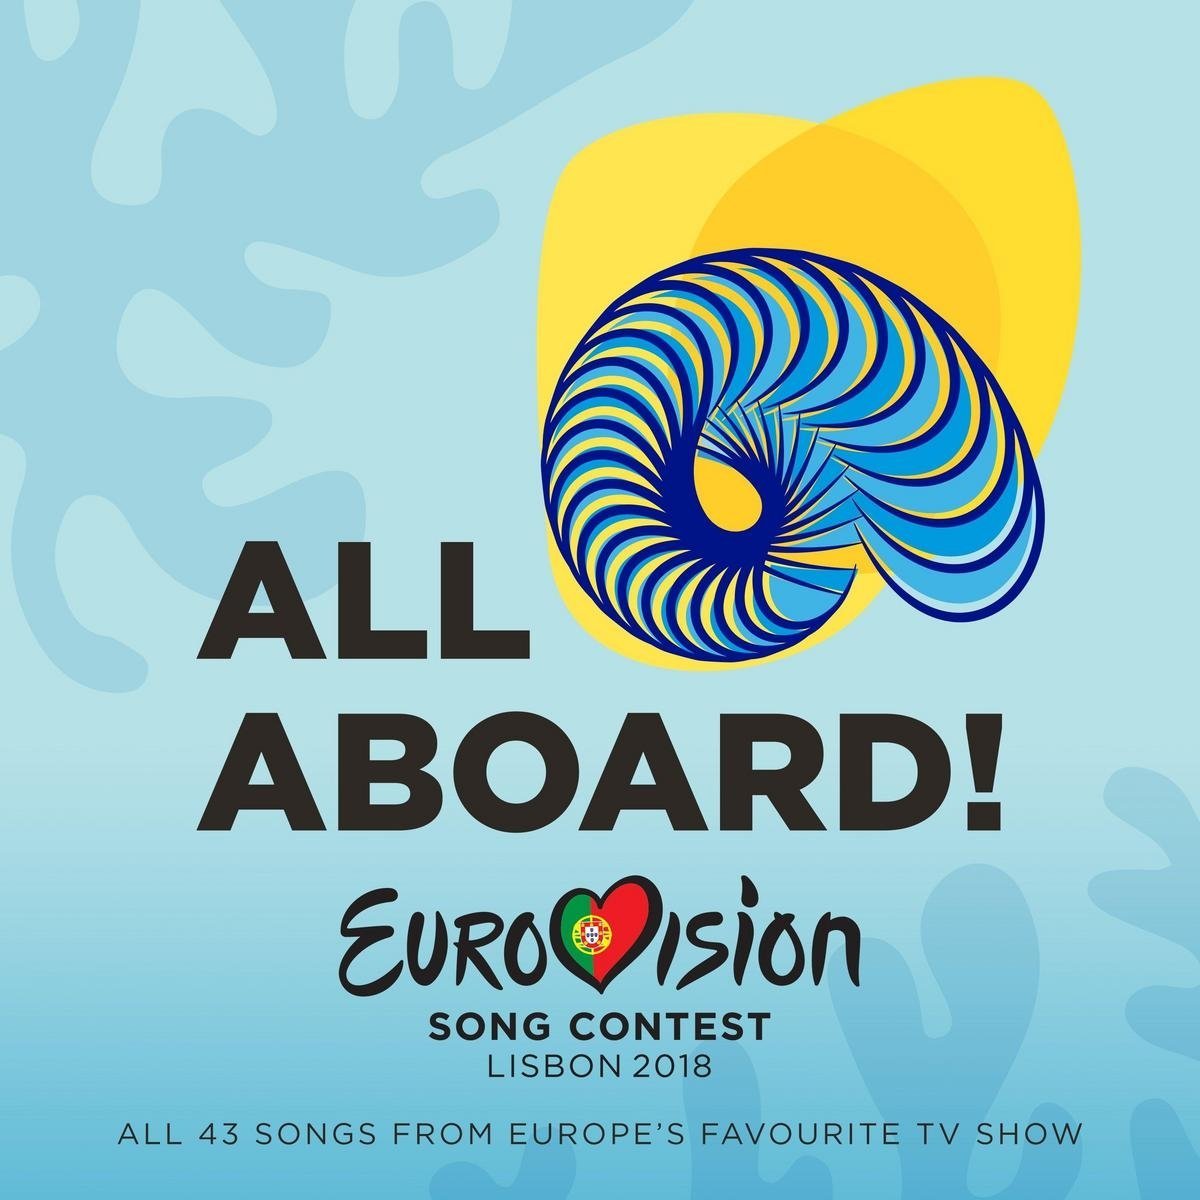 eurovision song contest 2018